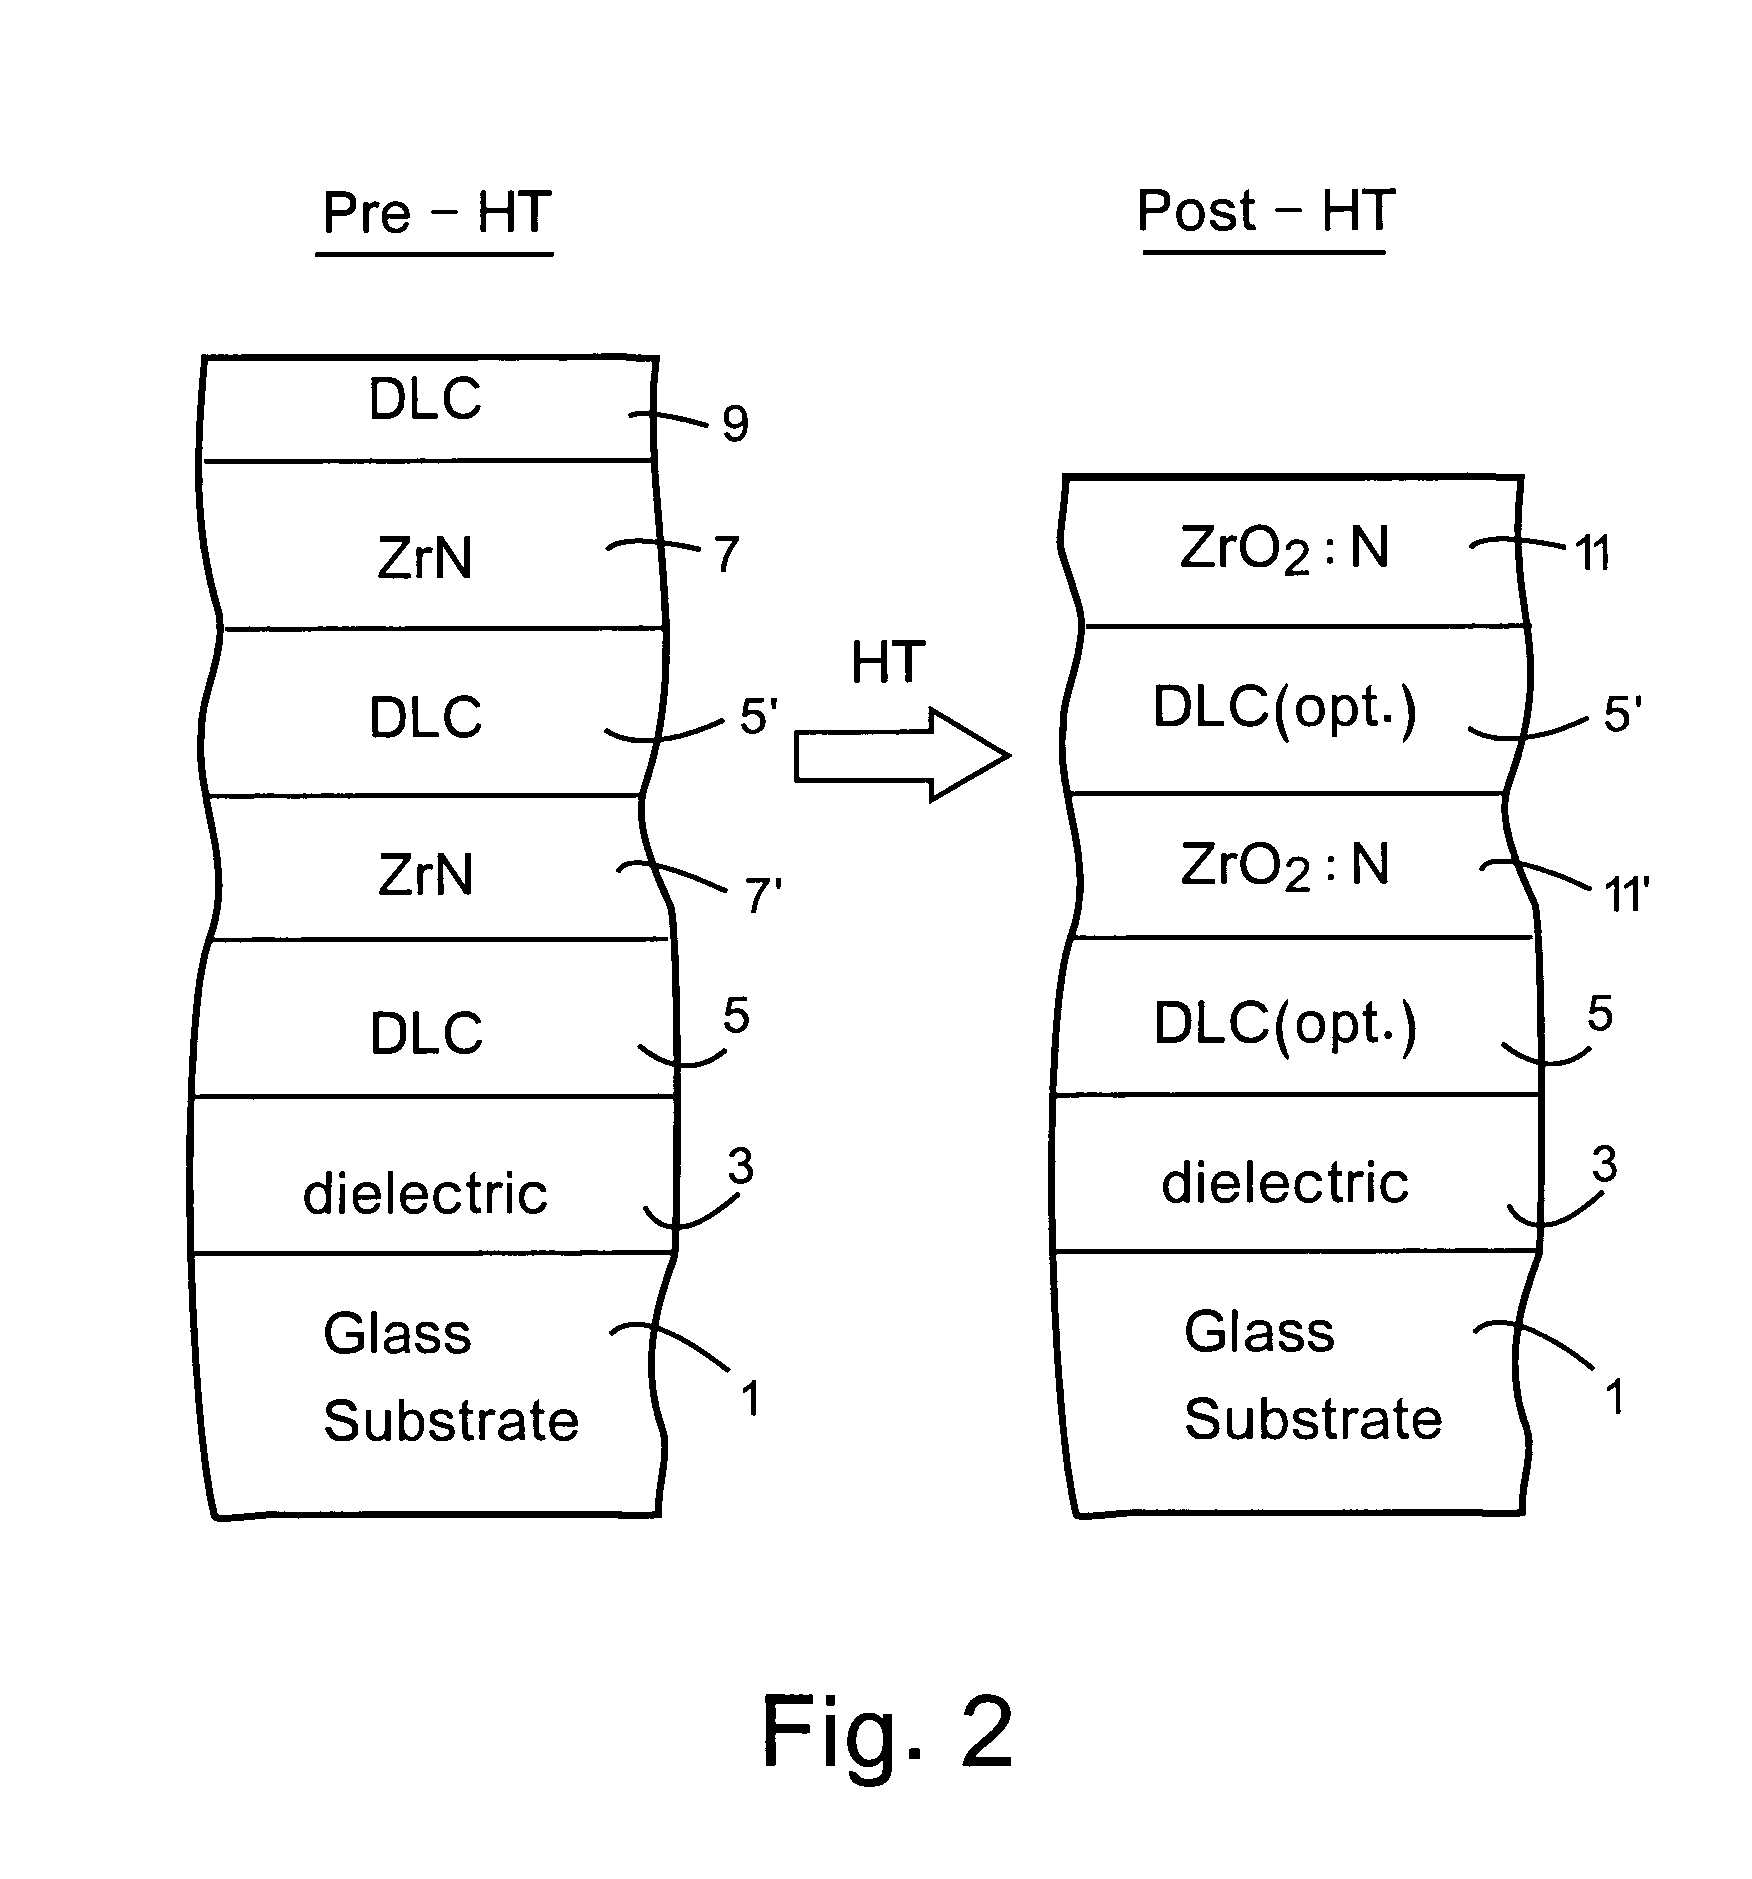 Heat treatable coated article with diamond-like carbon (DLC) and/or zirconium in coating